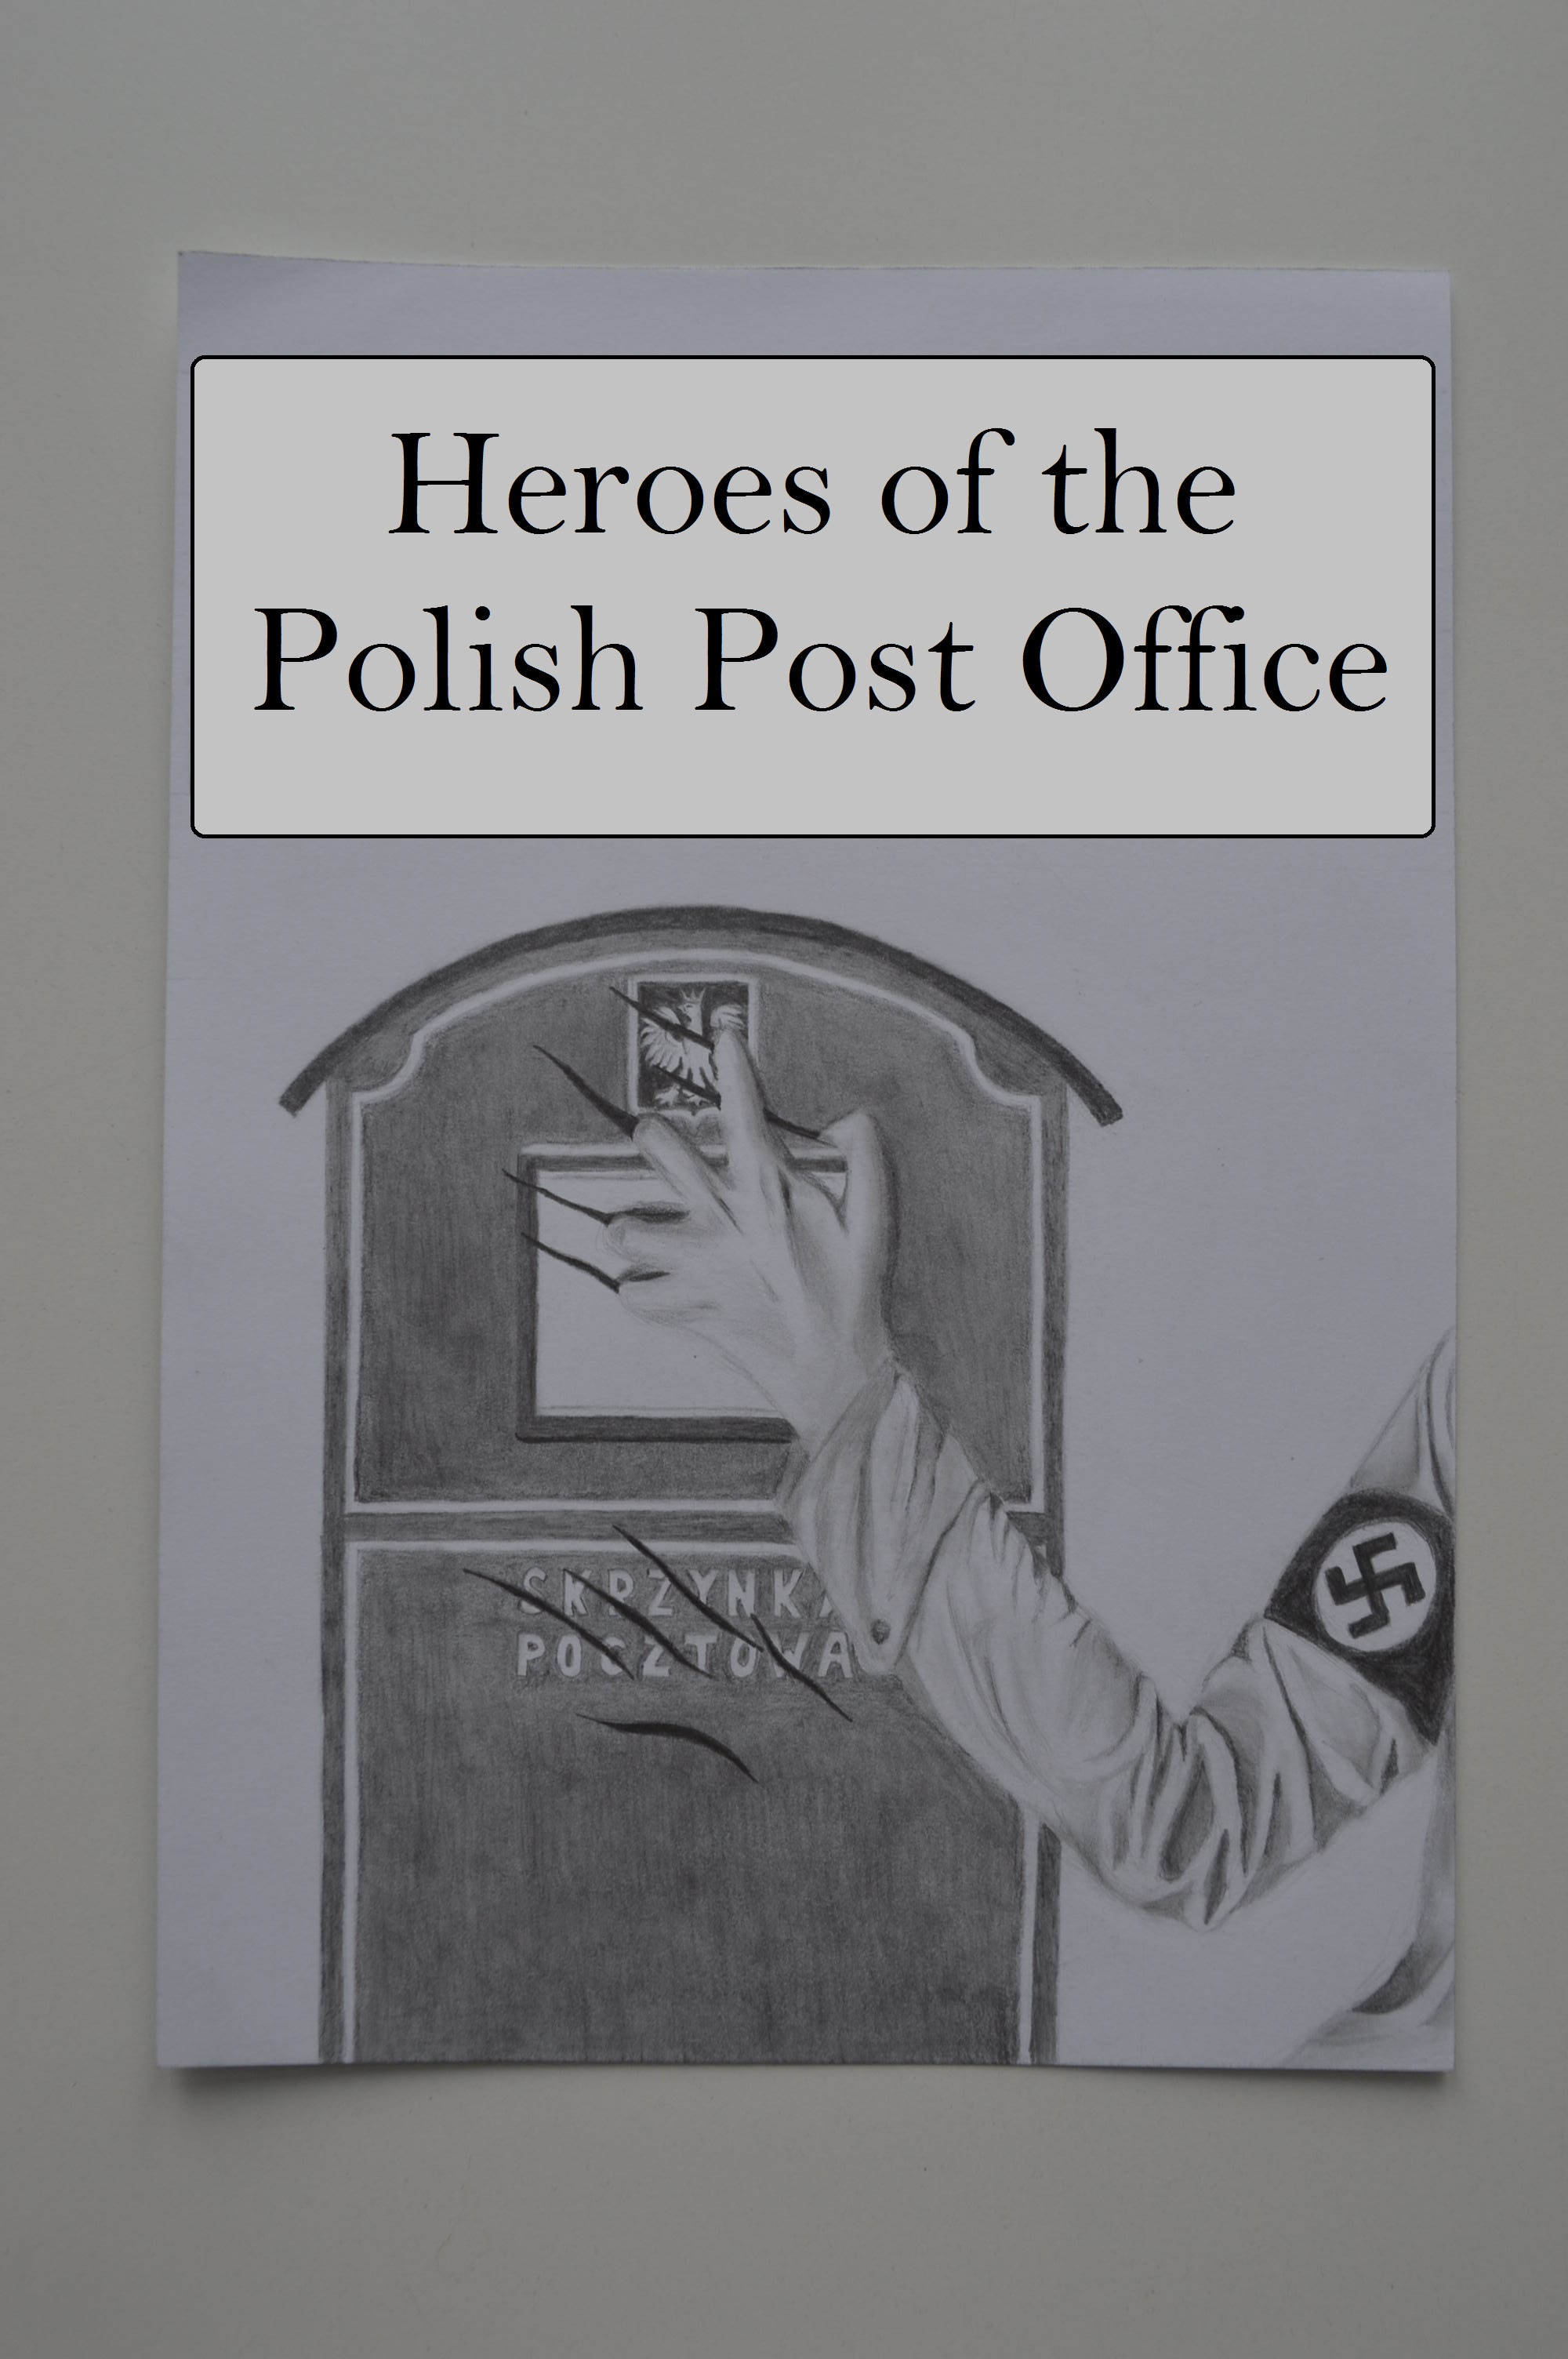 HEROES OF THE POST OFFICE by Magdalena Piekarska - Ourboox.com